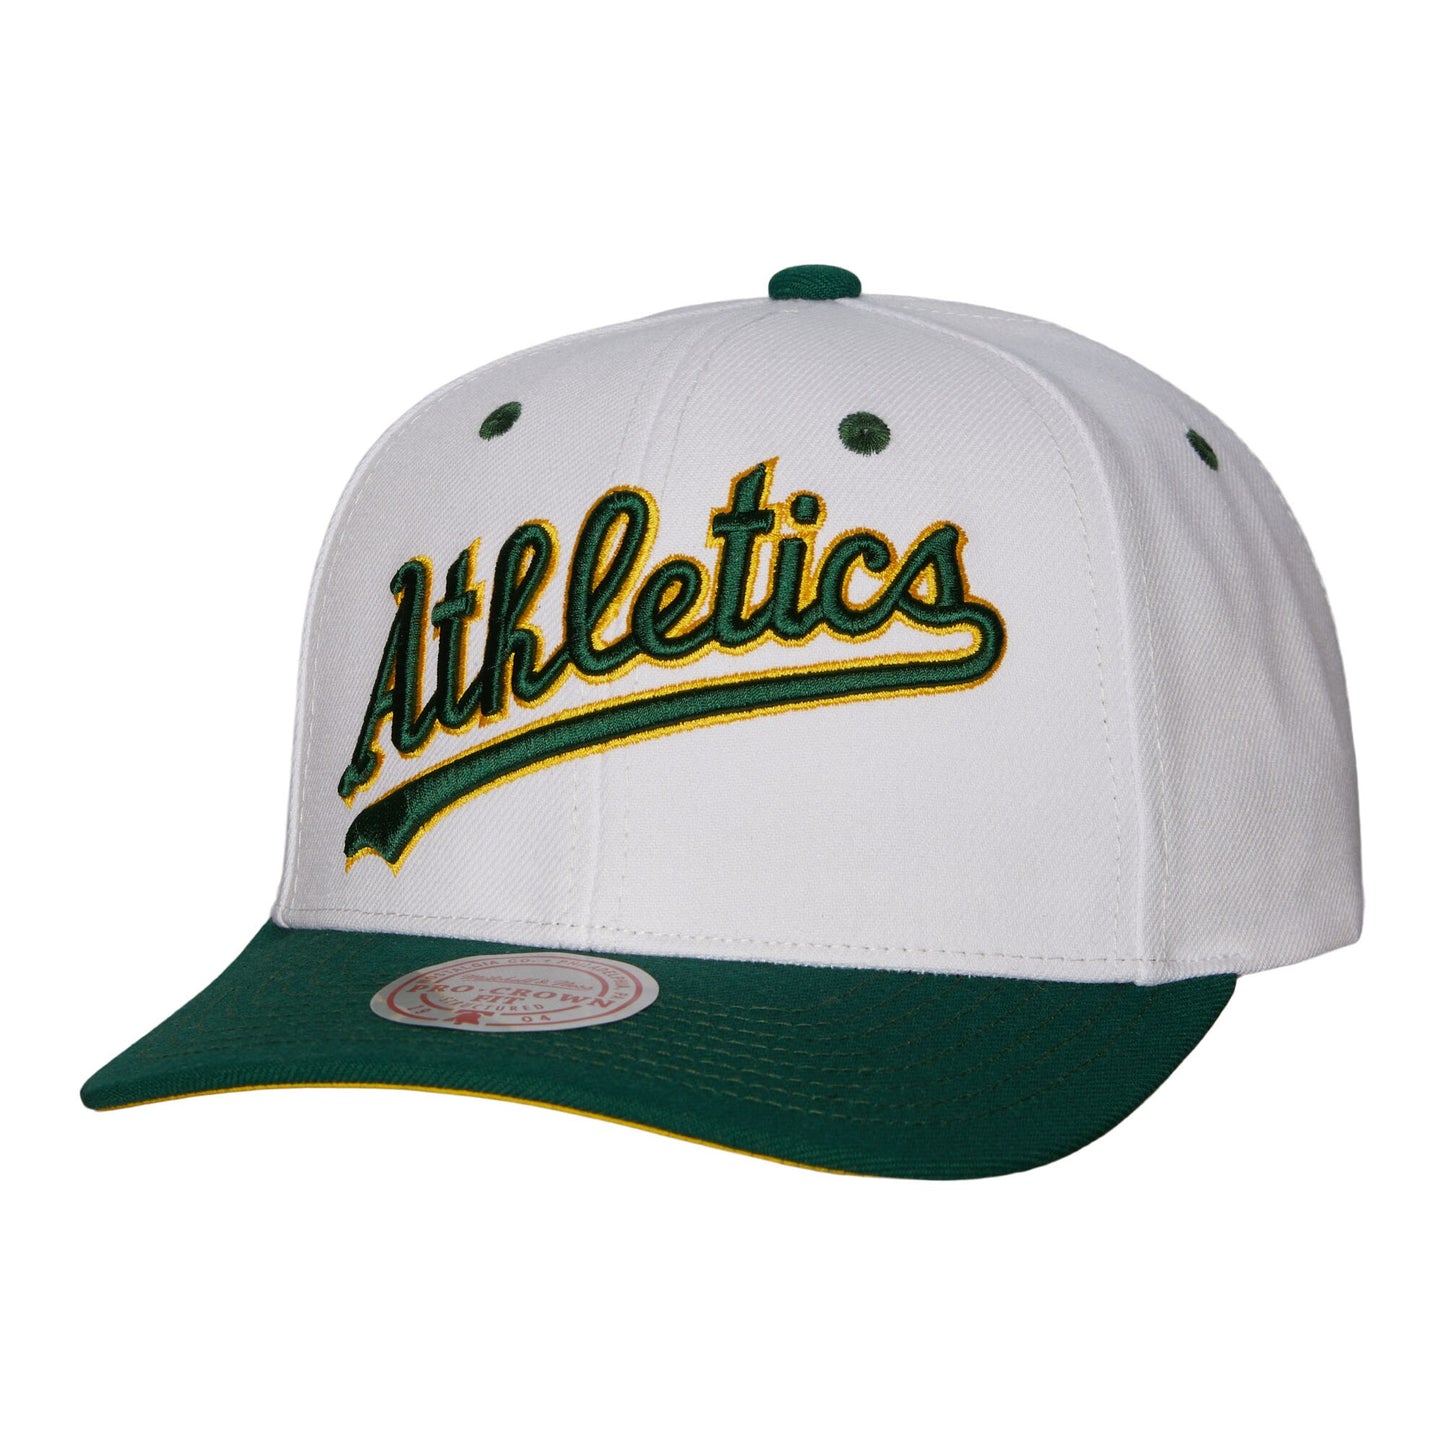 Oakland Athletics Mitchell & Ness Cooperstown Collection Pro Crown Snapback Hat - White